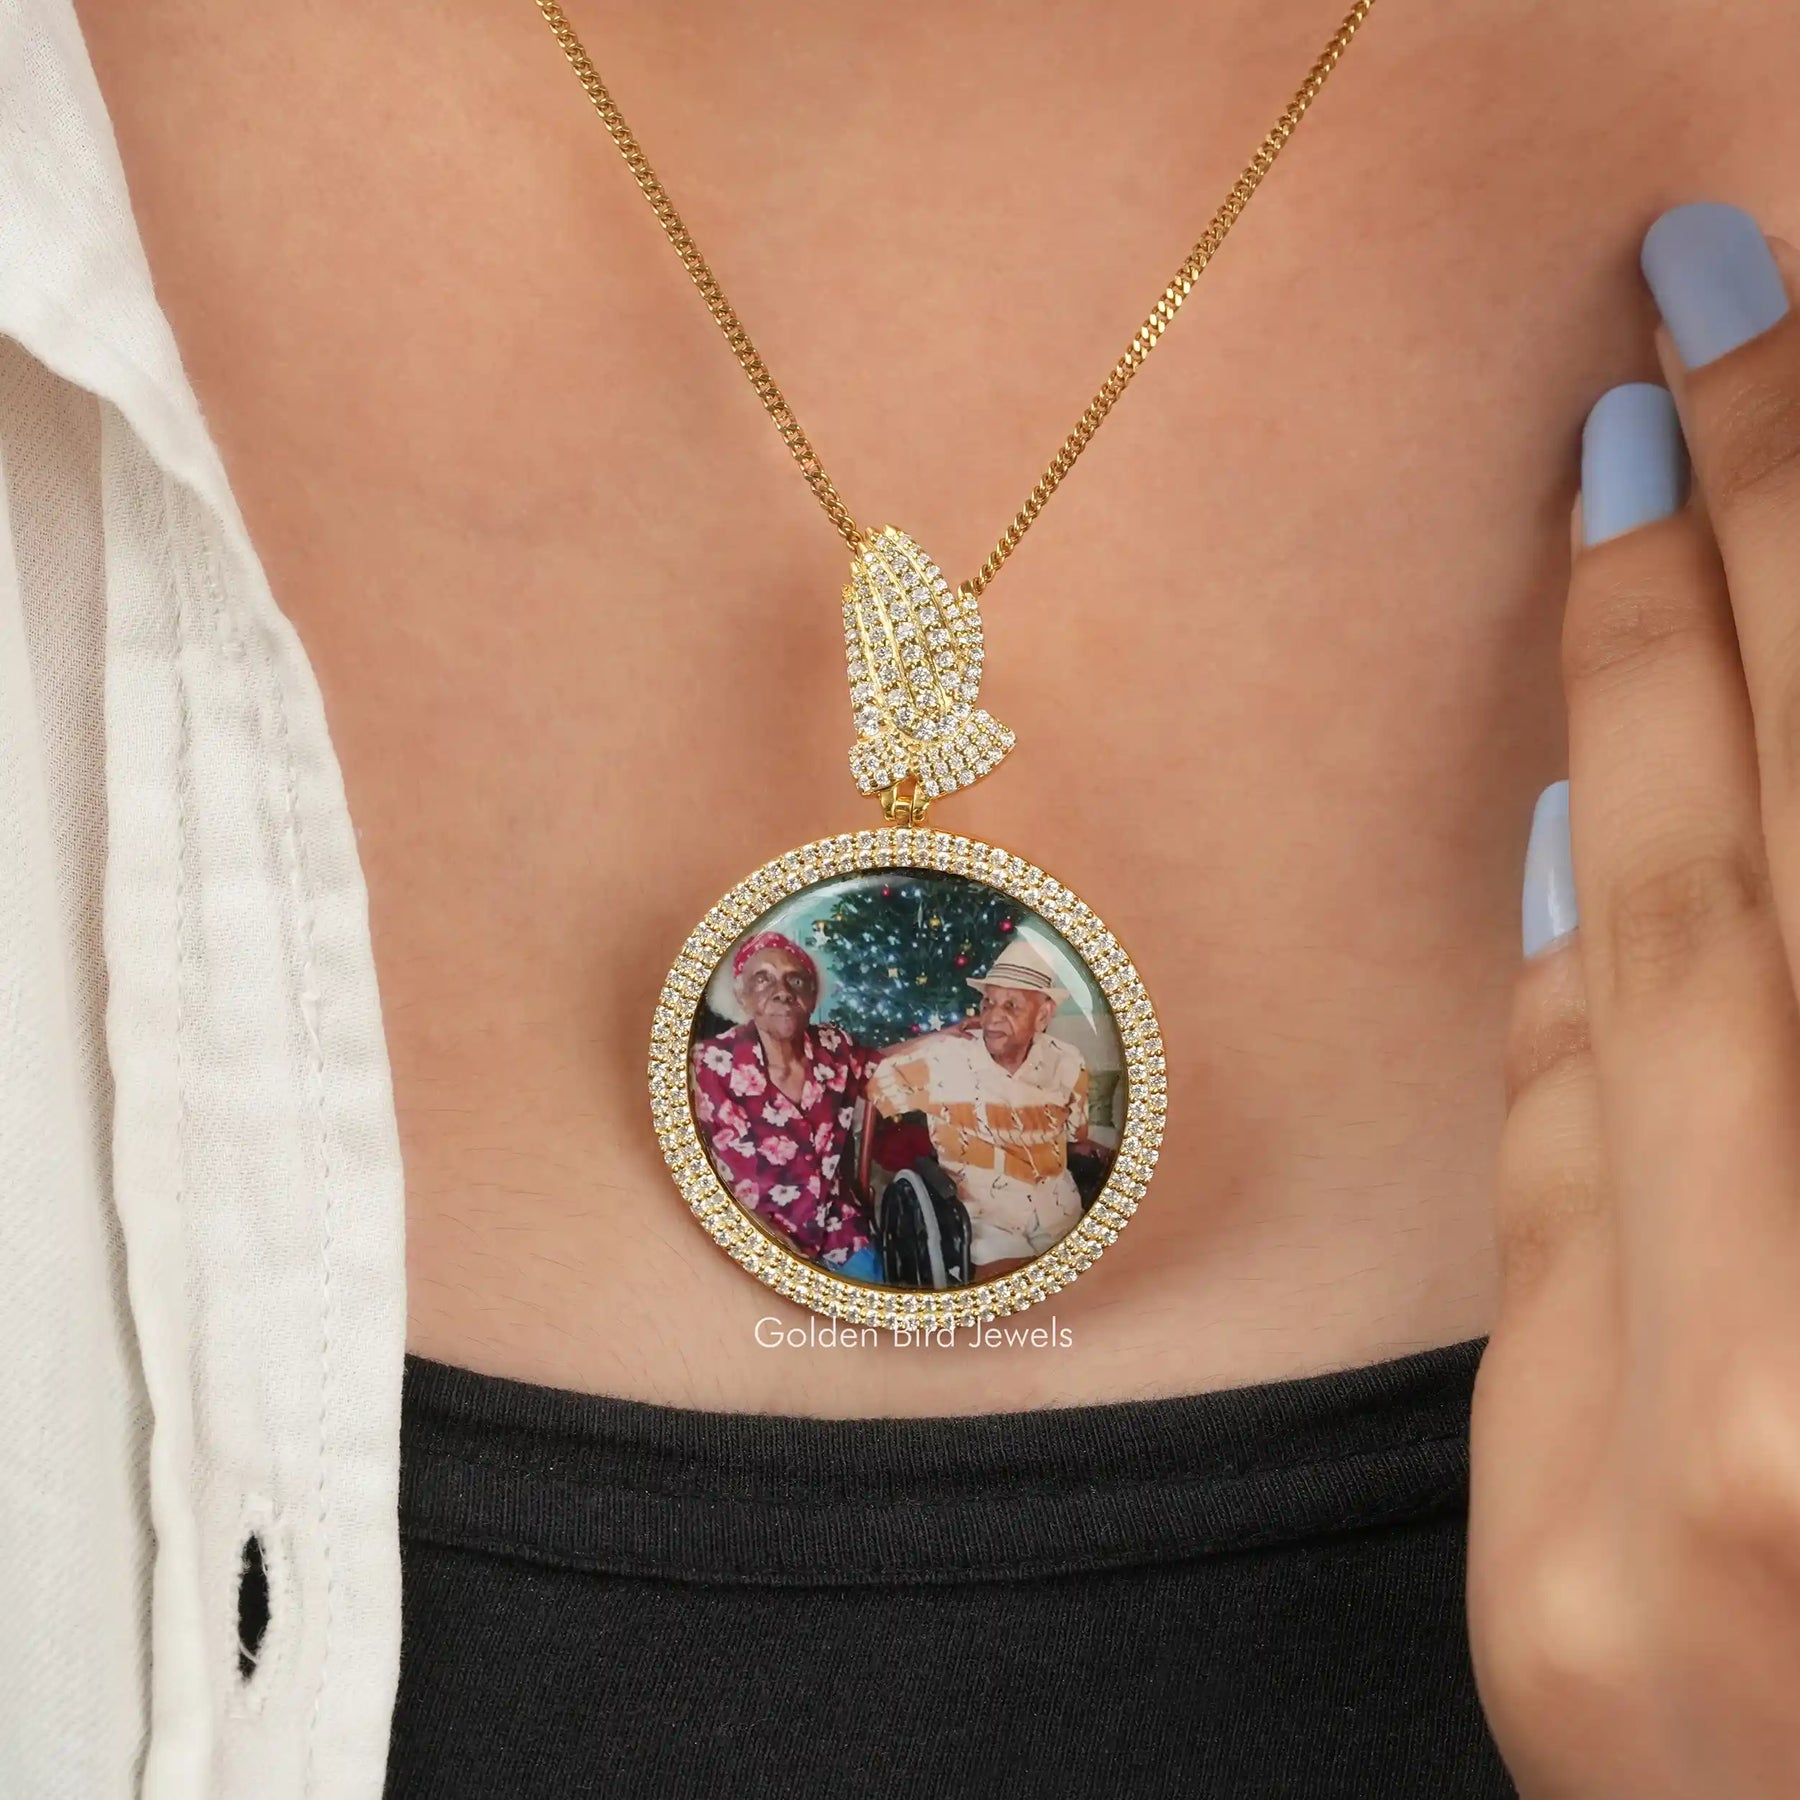 [This moissanite round cut customize photo pendant with VVS moissanite]-[Golden Bird Jewels]